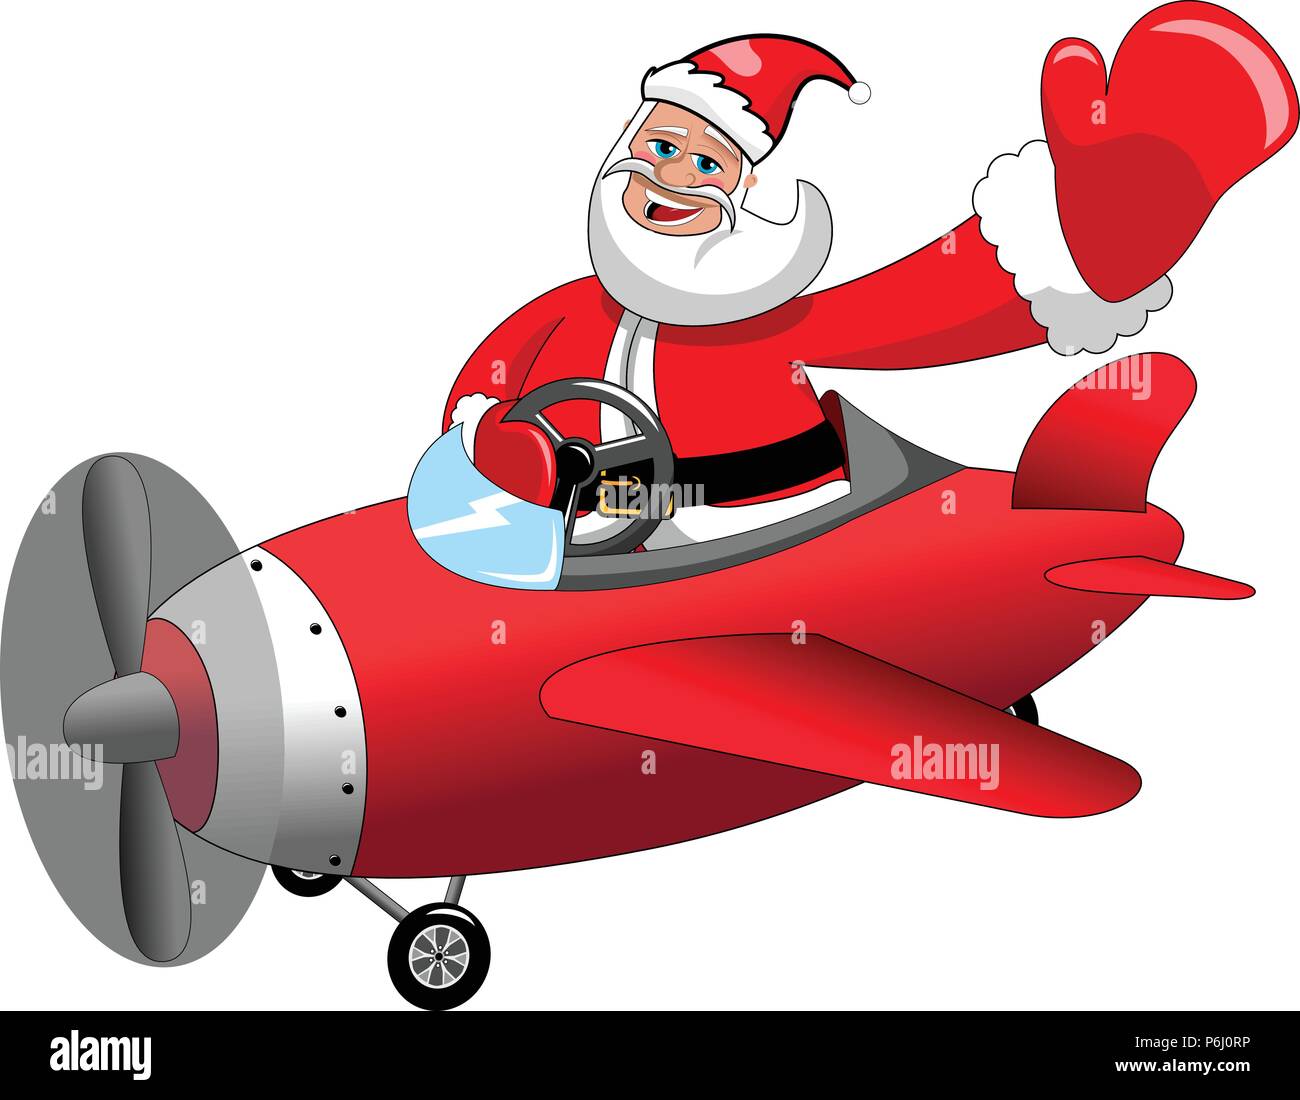 Santa Claus cartoon flying on airplane at Christmas isolated Stock Vector